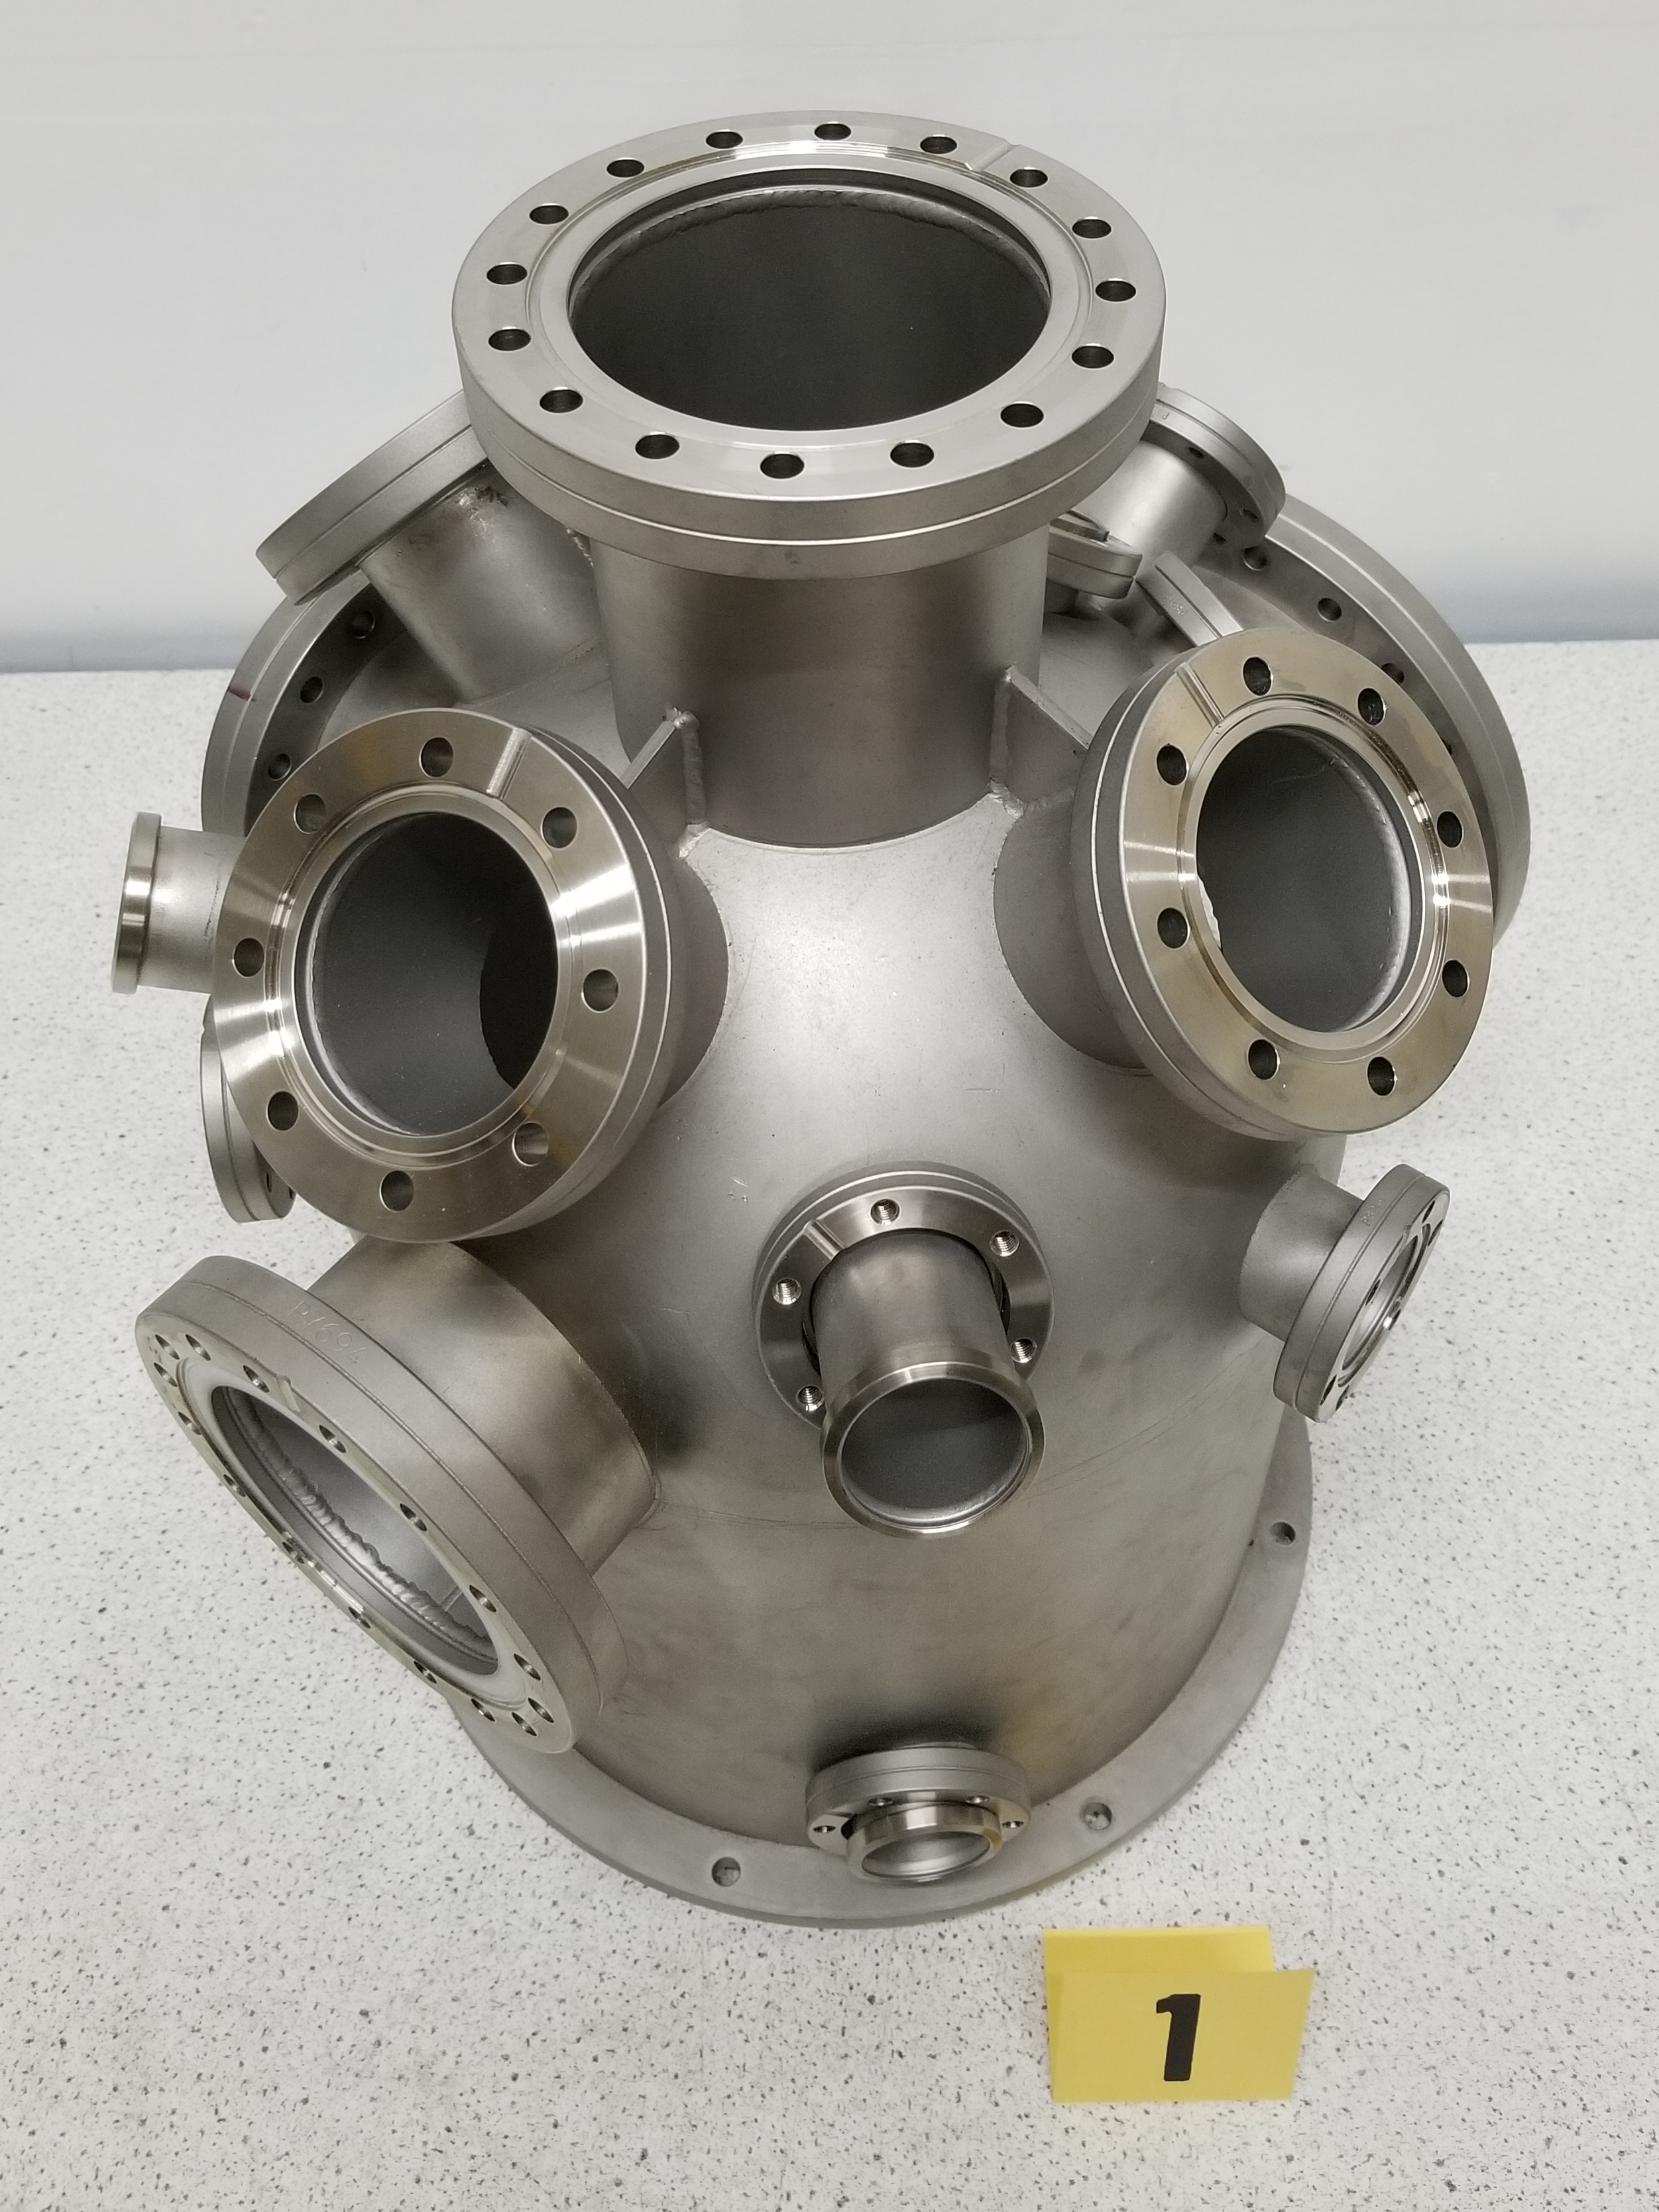 UHV Surface Science Vacuum Chamber